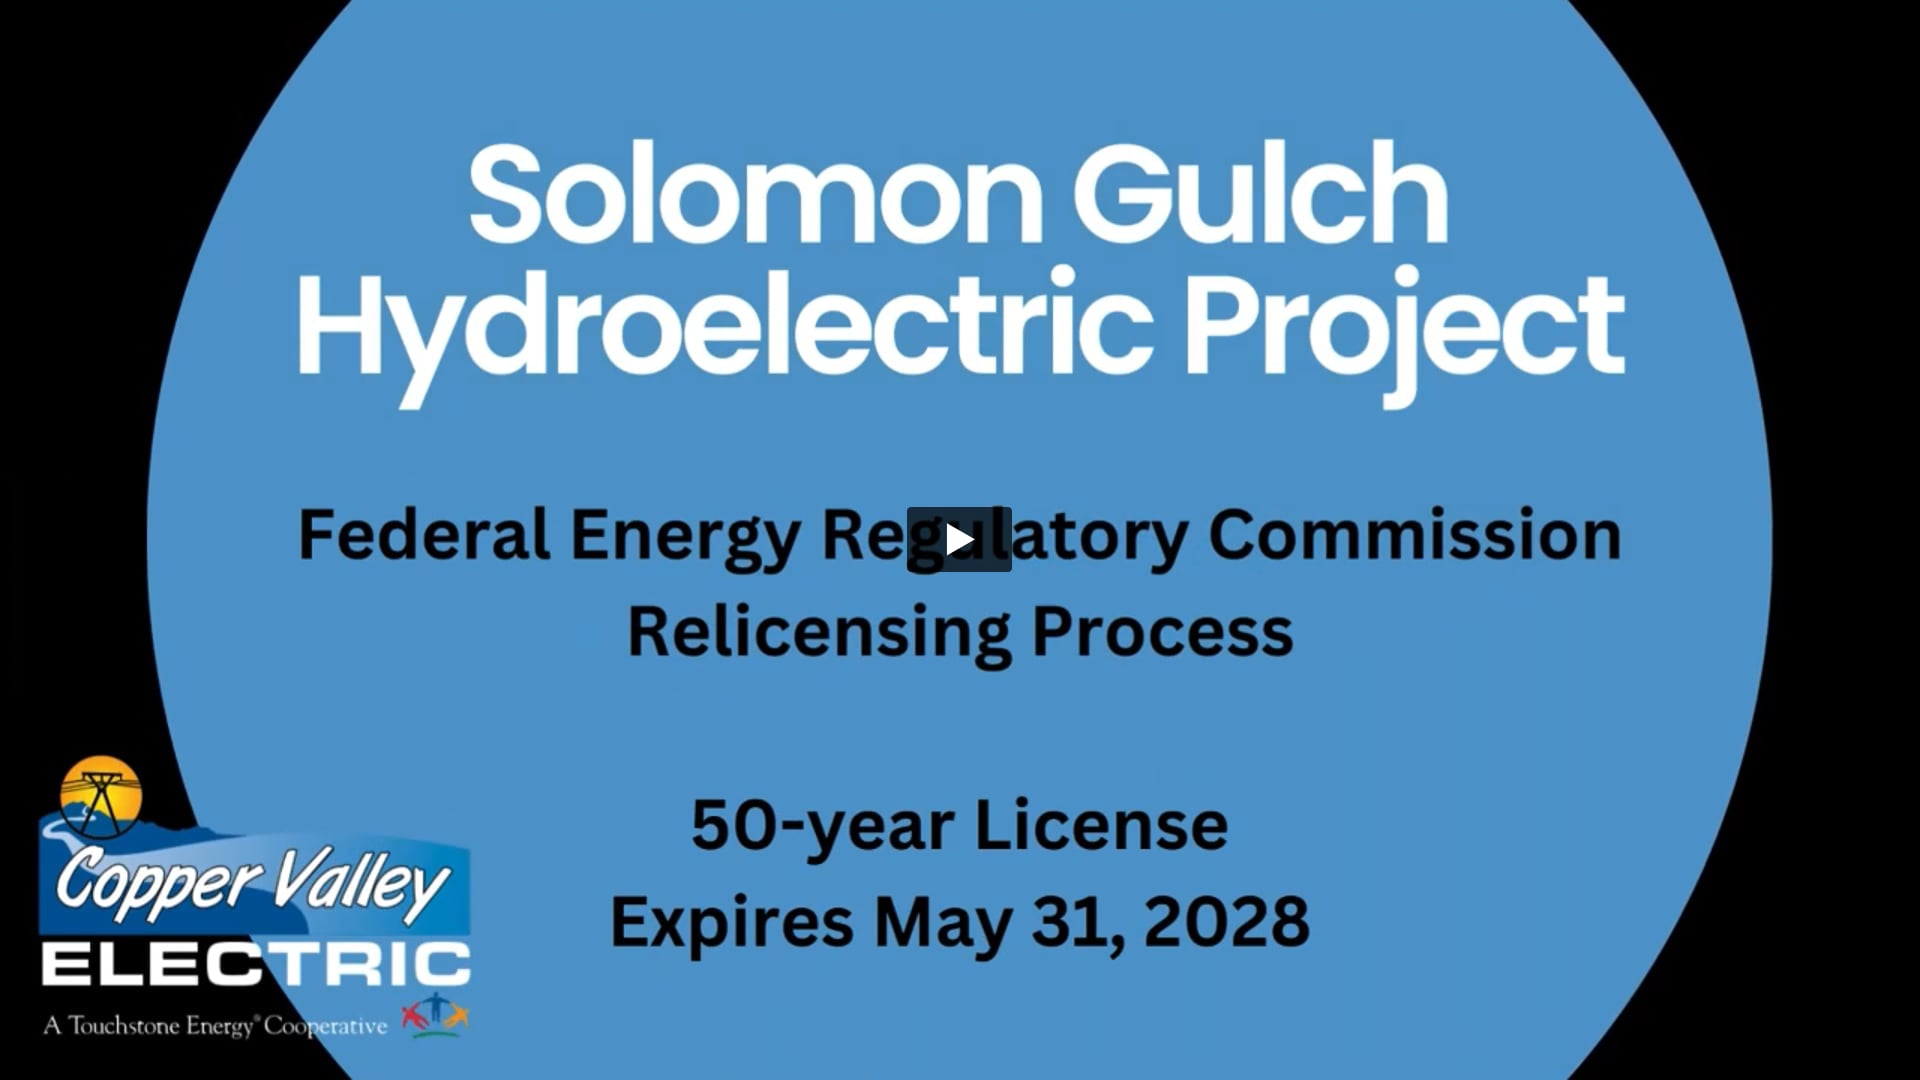 Watch above video to see a summary of the Solomon Gulch Relicensing Project